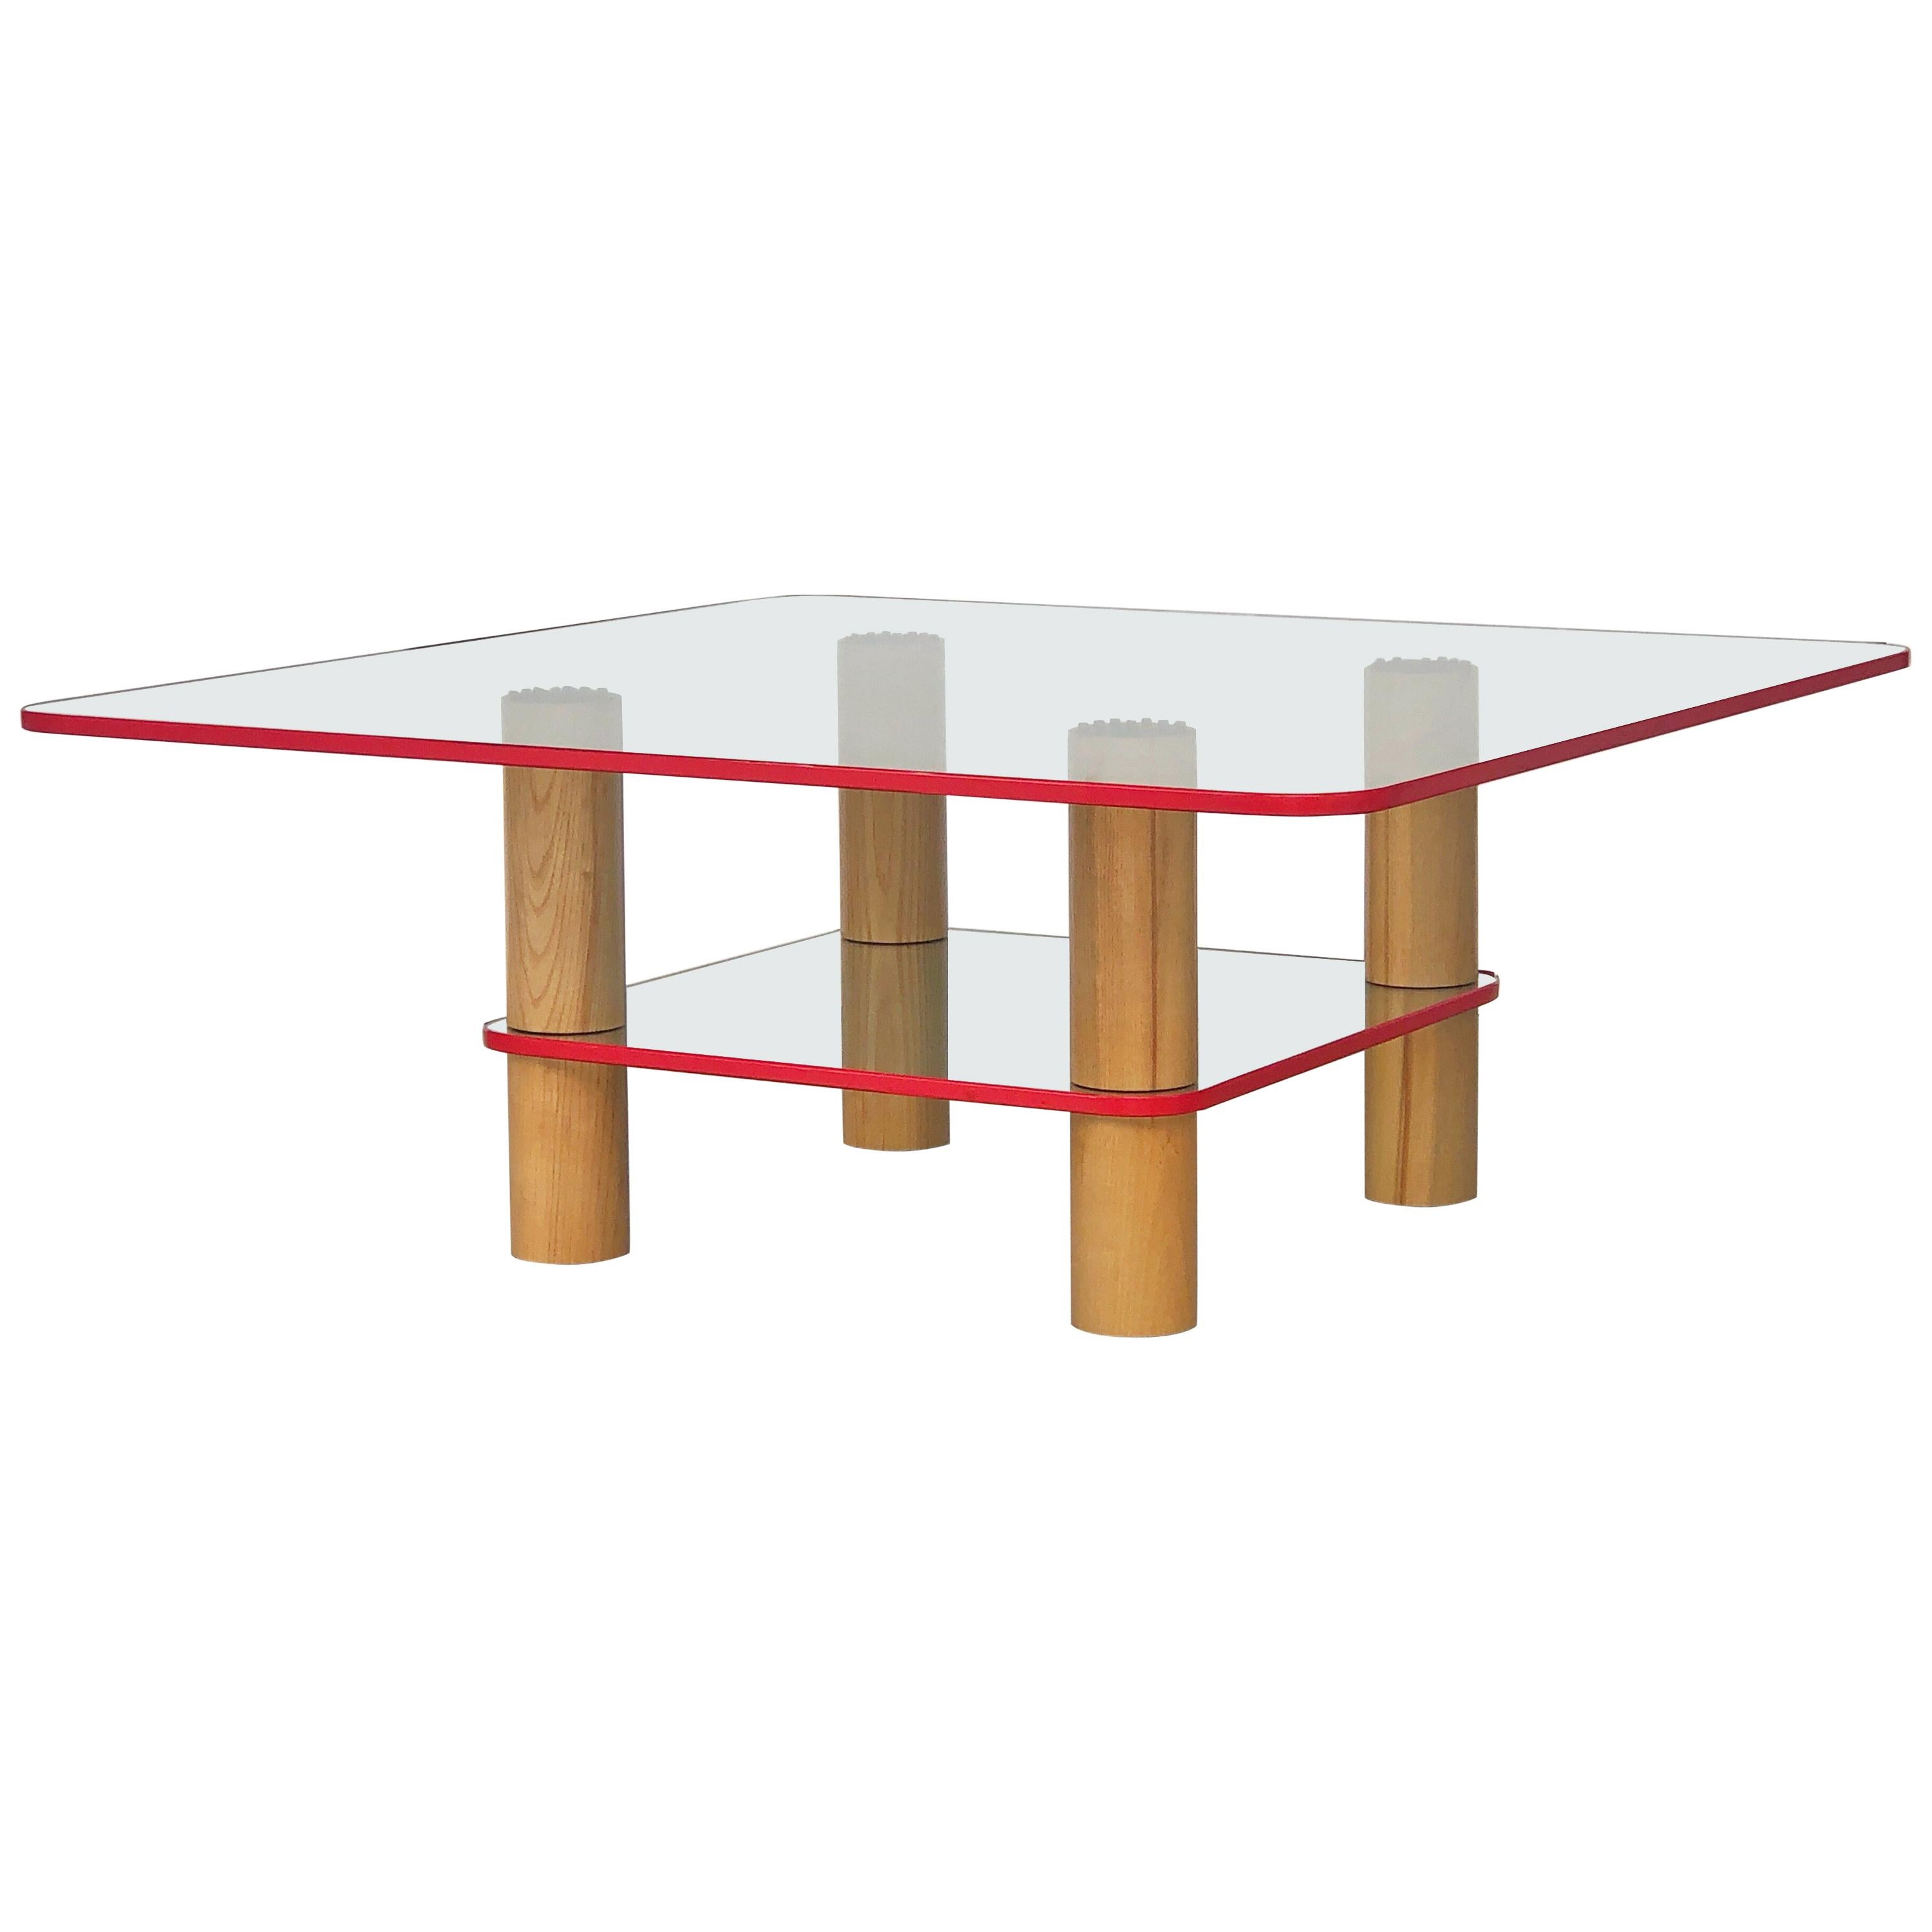 Post Modern Glass and Wood Coffee Table with Red Edge, 1980 For Sale